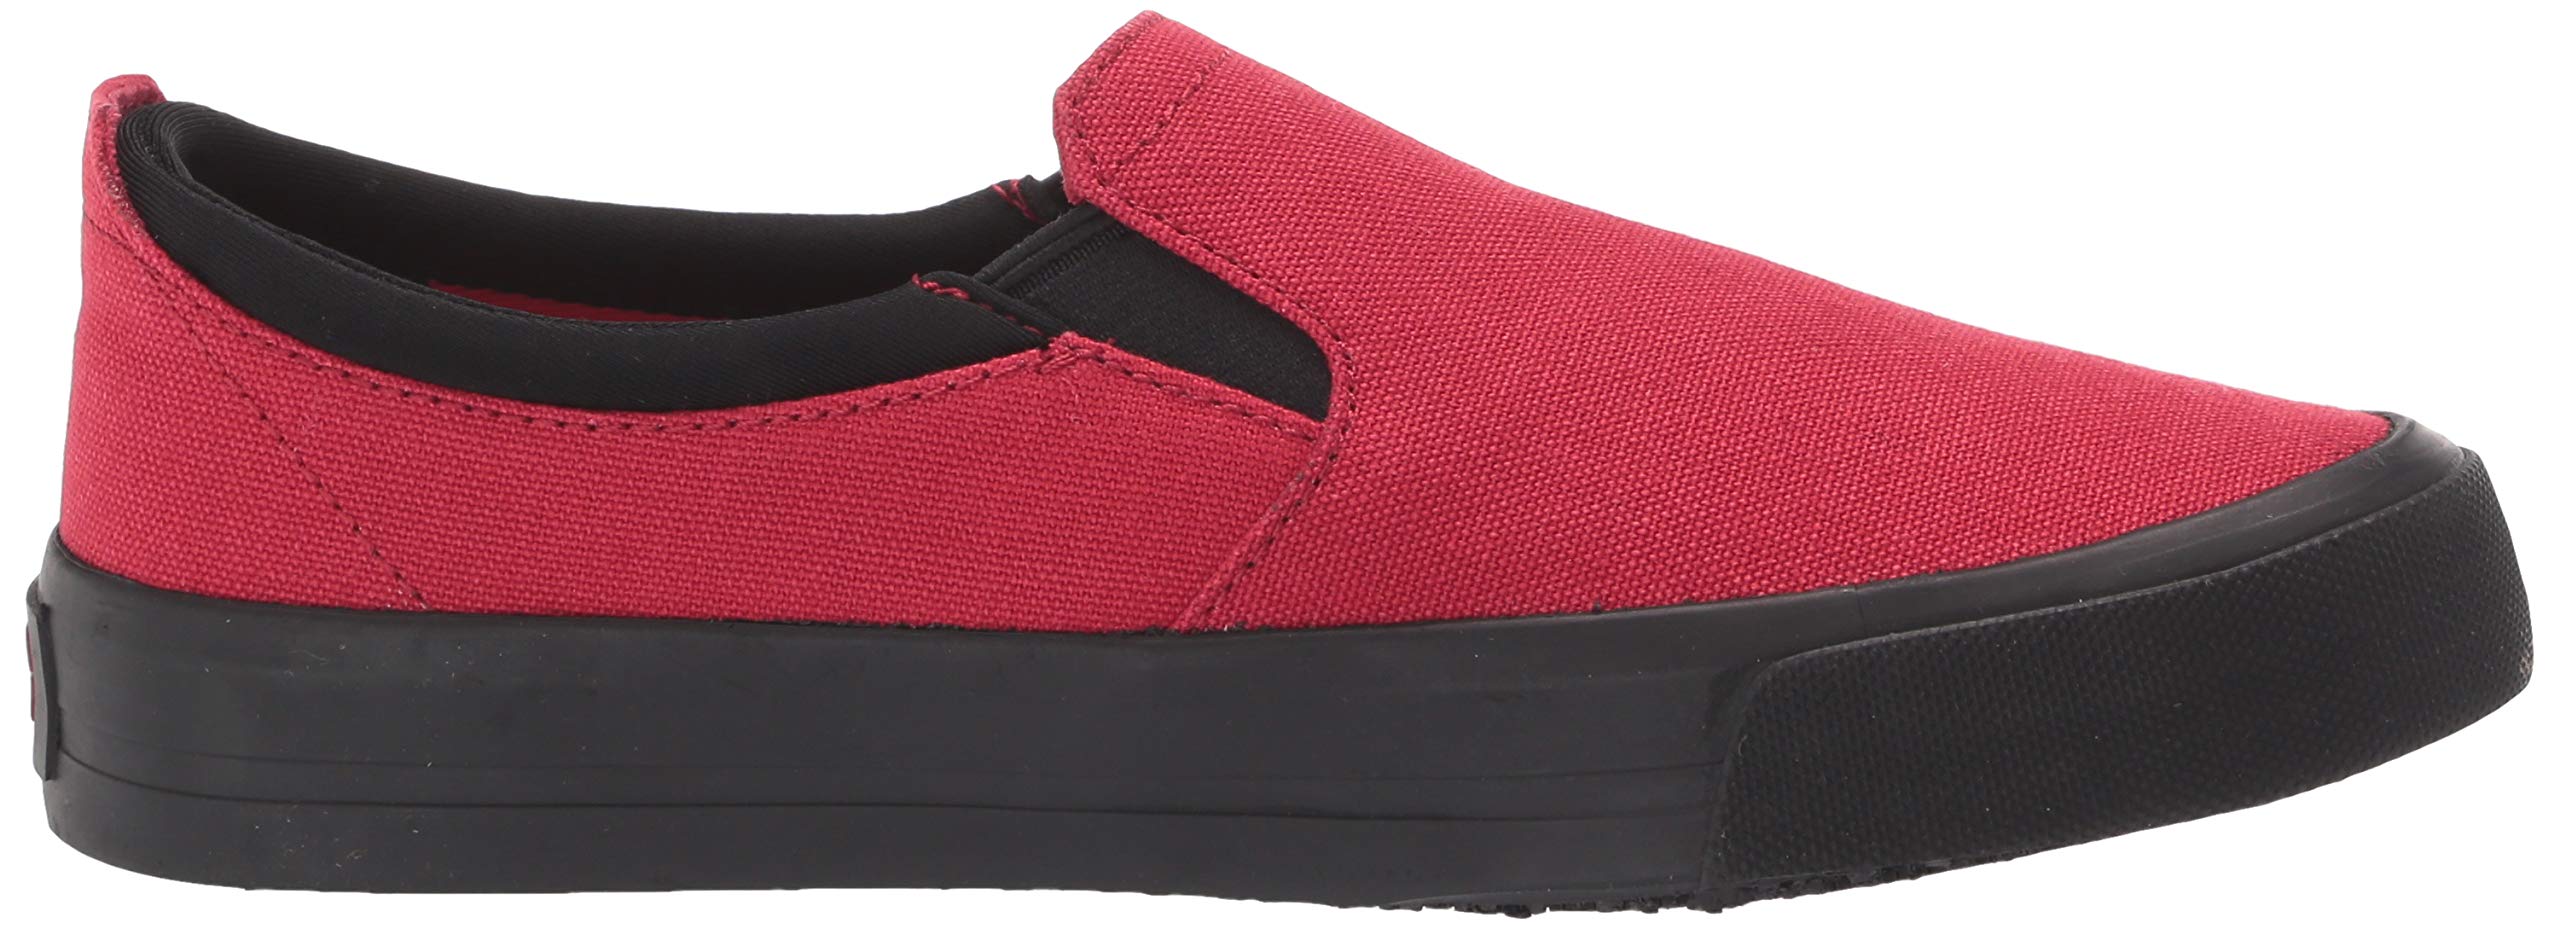 Shoes for Crews Ollie II, Mens, Women's, Unisex Slip Resistant Work Shoe Sneaker, Black Leather or Red Canvas